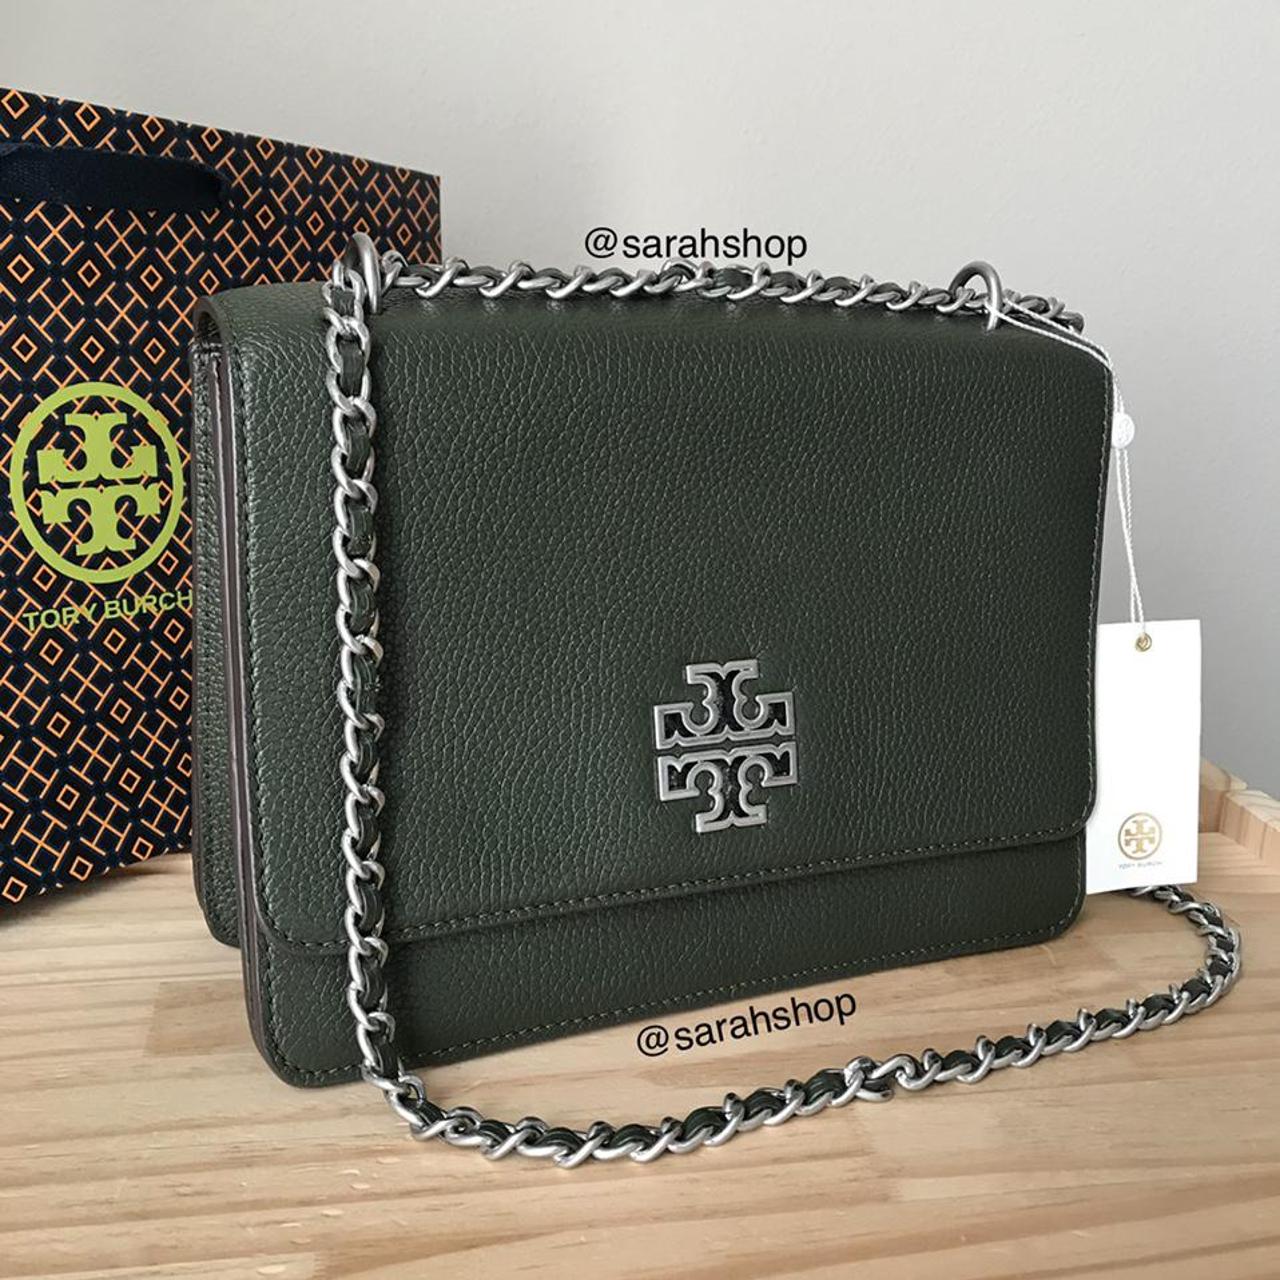 TORY BURCH Robinson Patent Quilted Chain Wallet